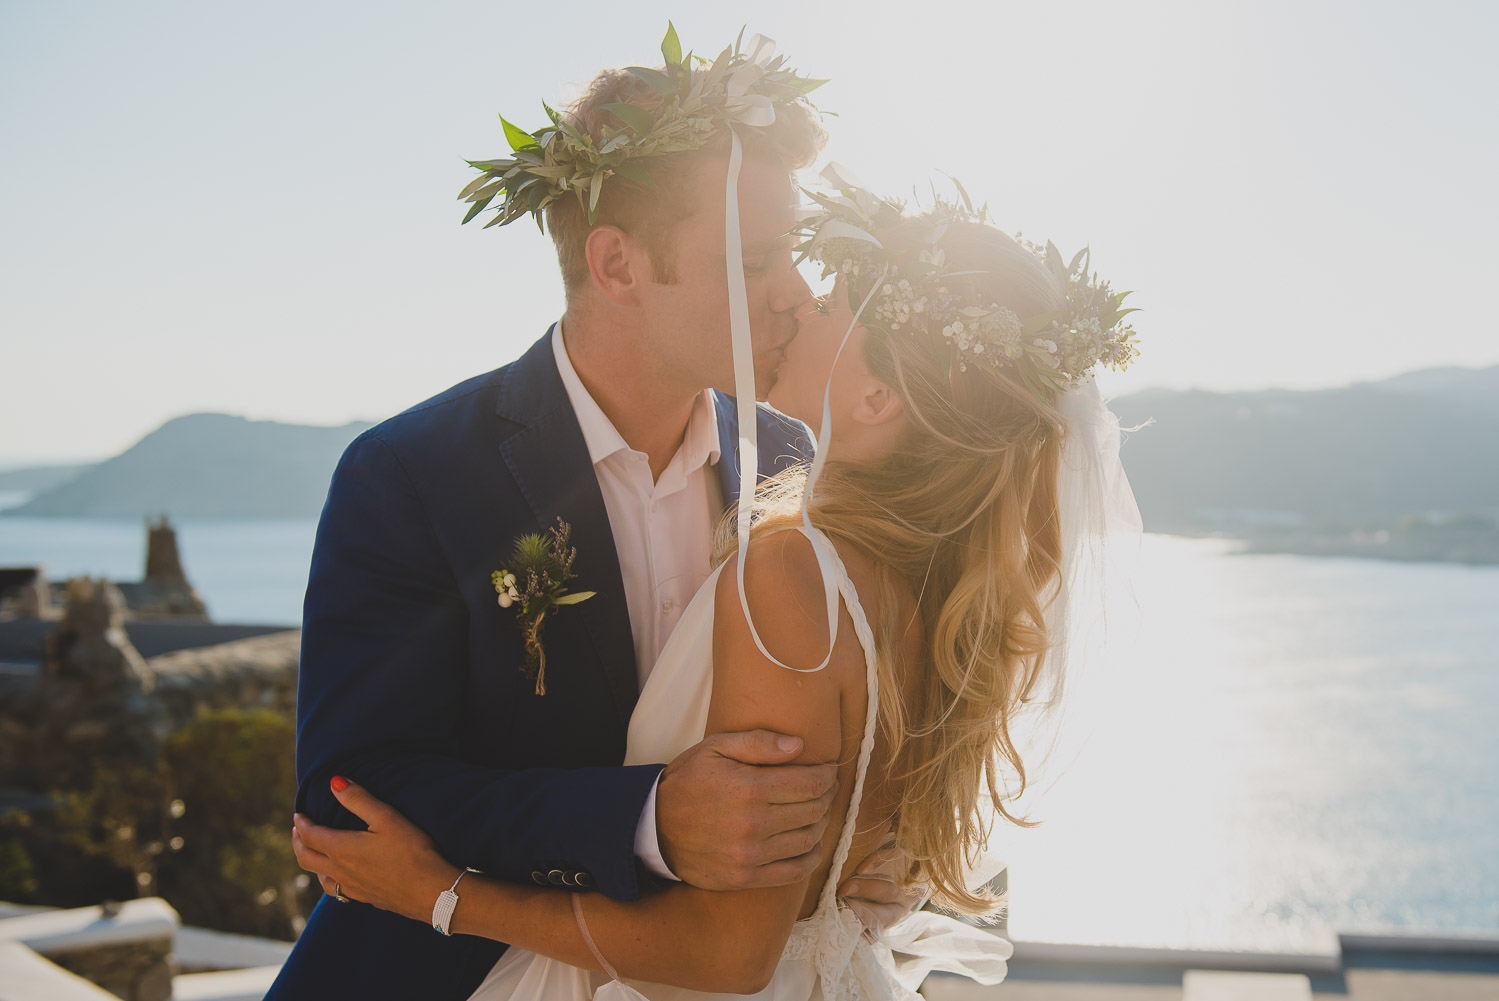 Wedding photographer Mykonos:  newlyweds kiss with olive branch wedding crowns on their heads backlit by the sun after Mykonos wedding ceremony.